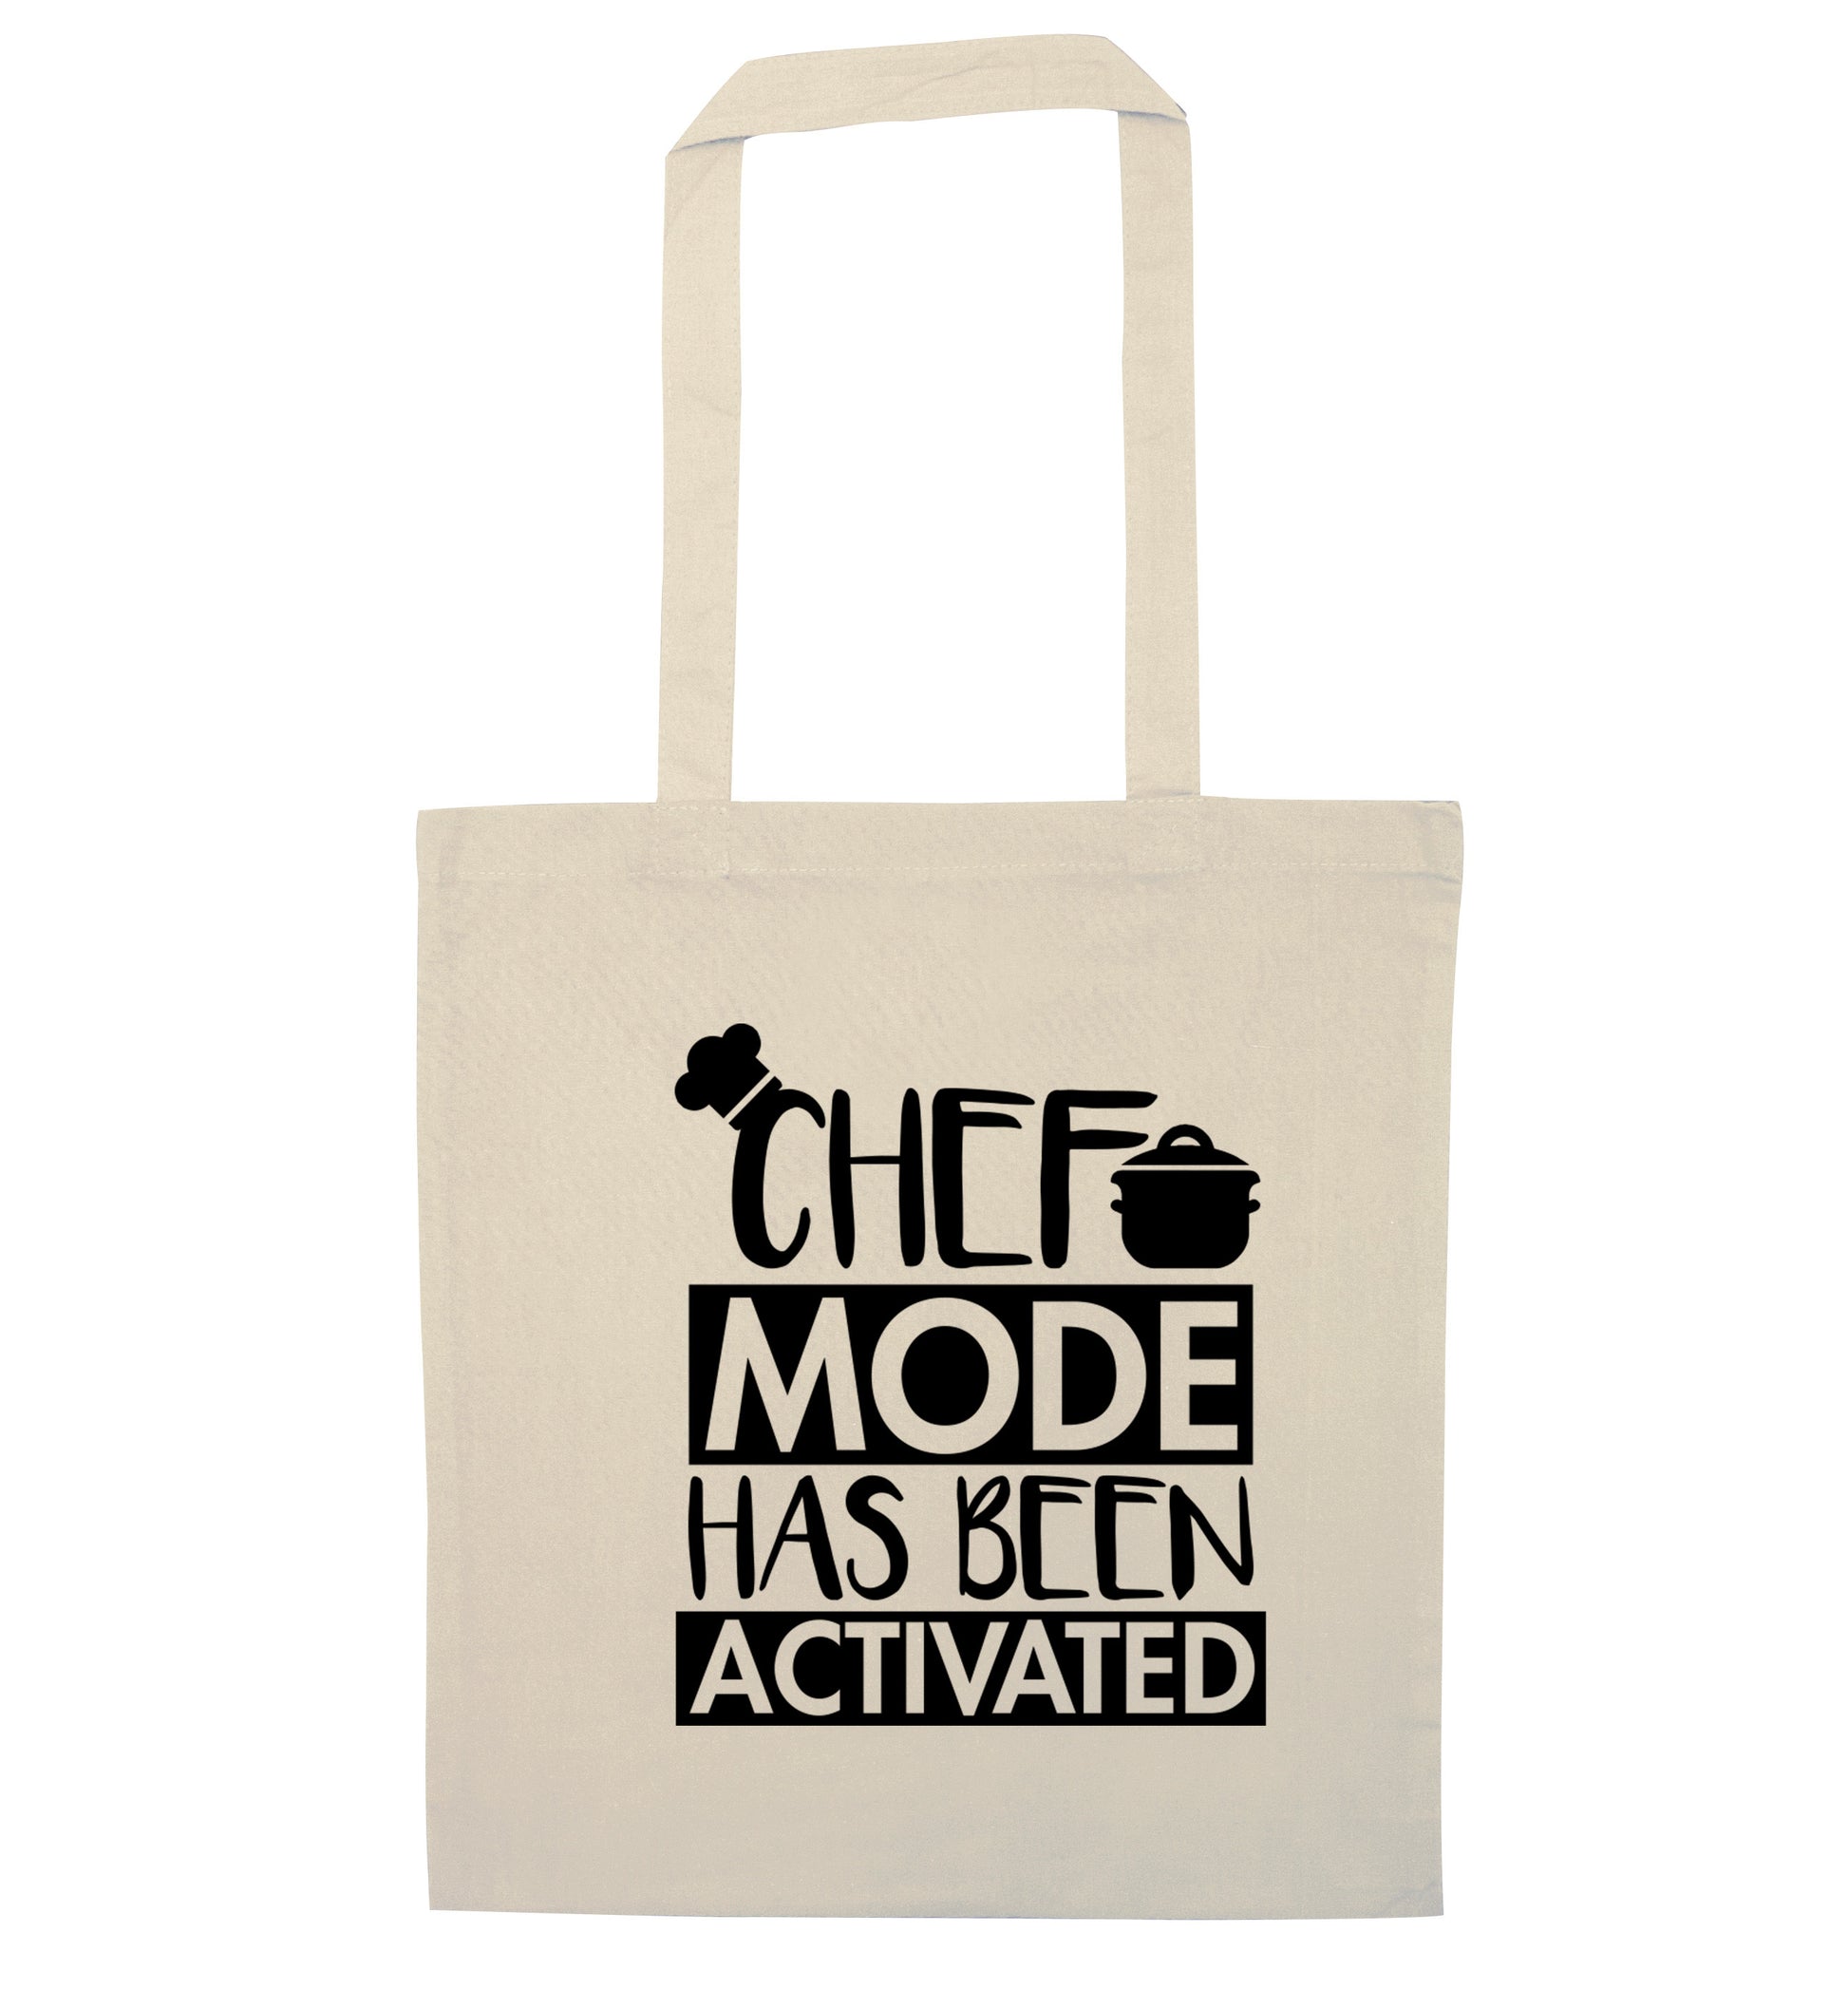 Chef mode has been activated natural tote bag